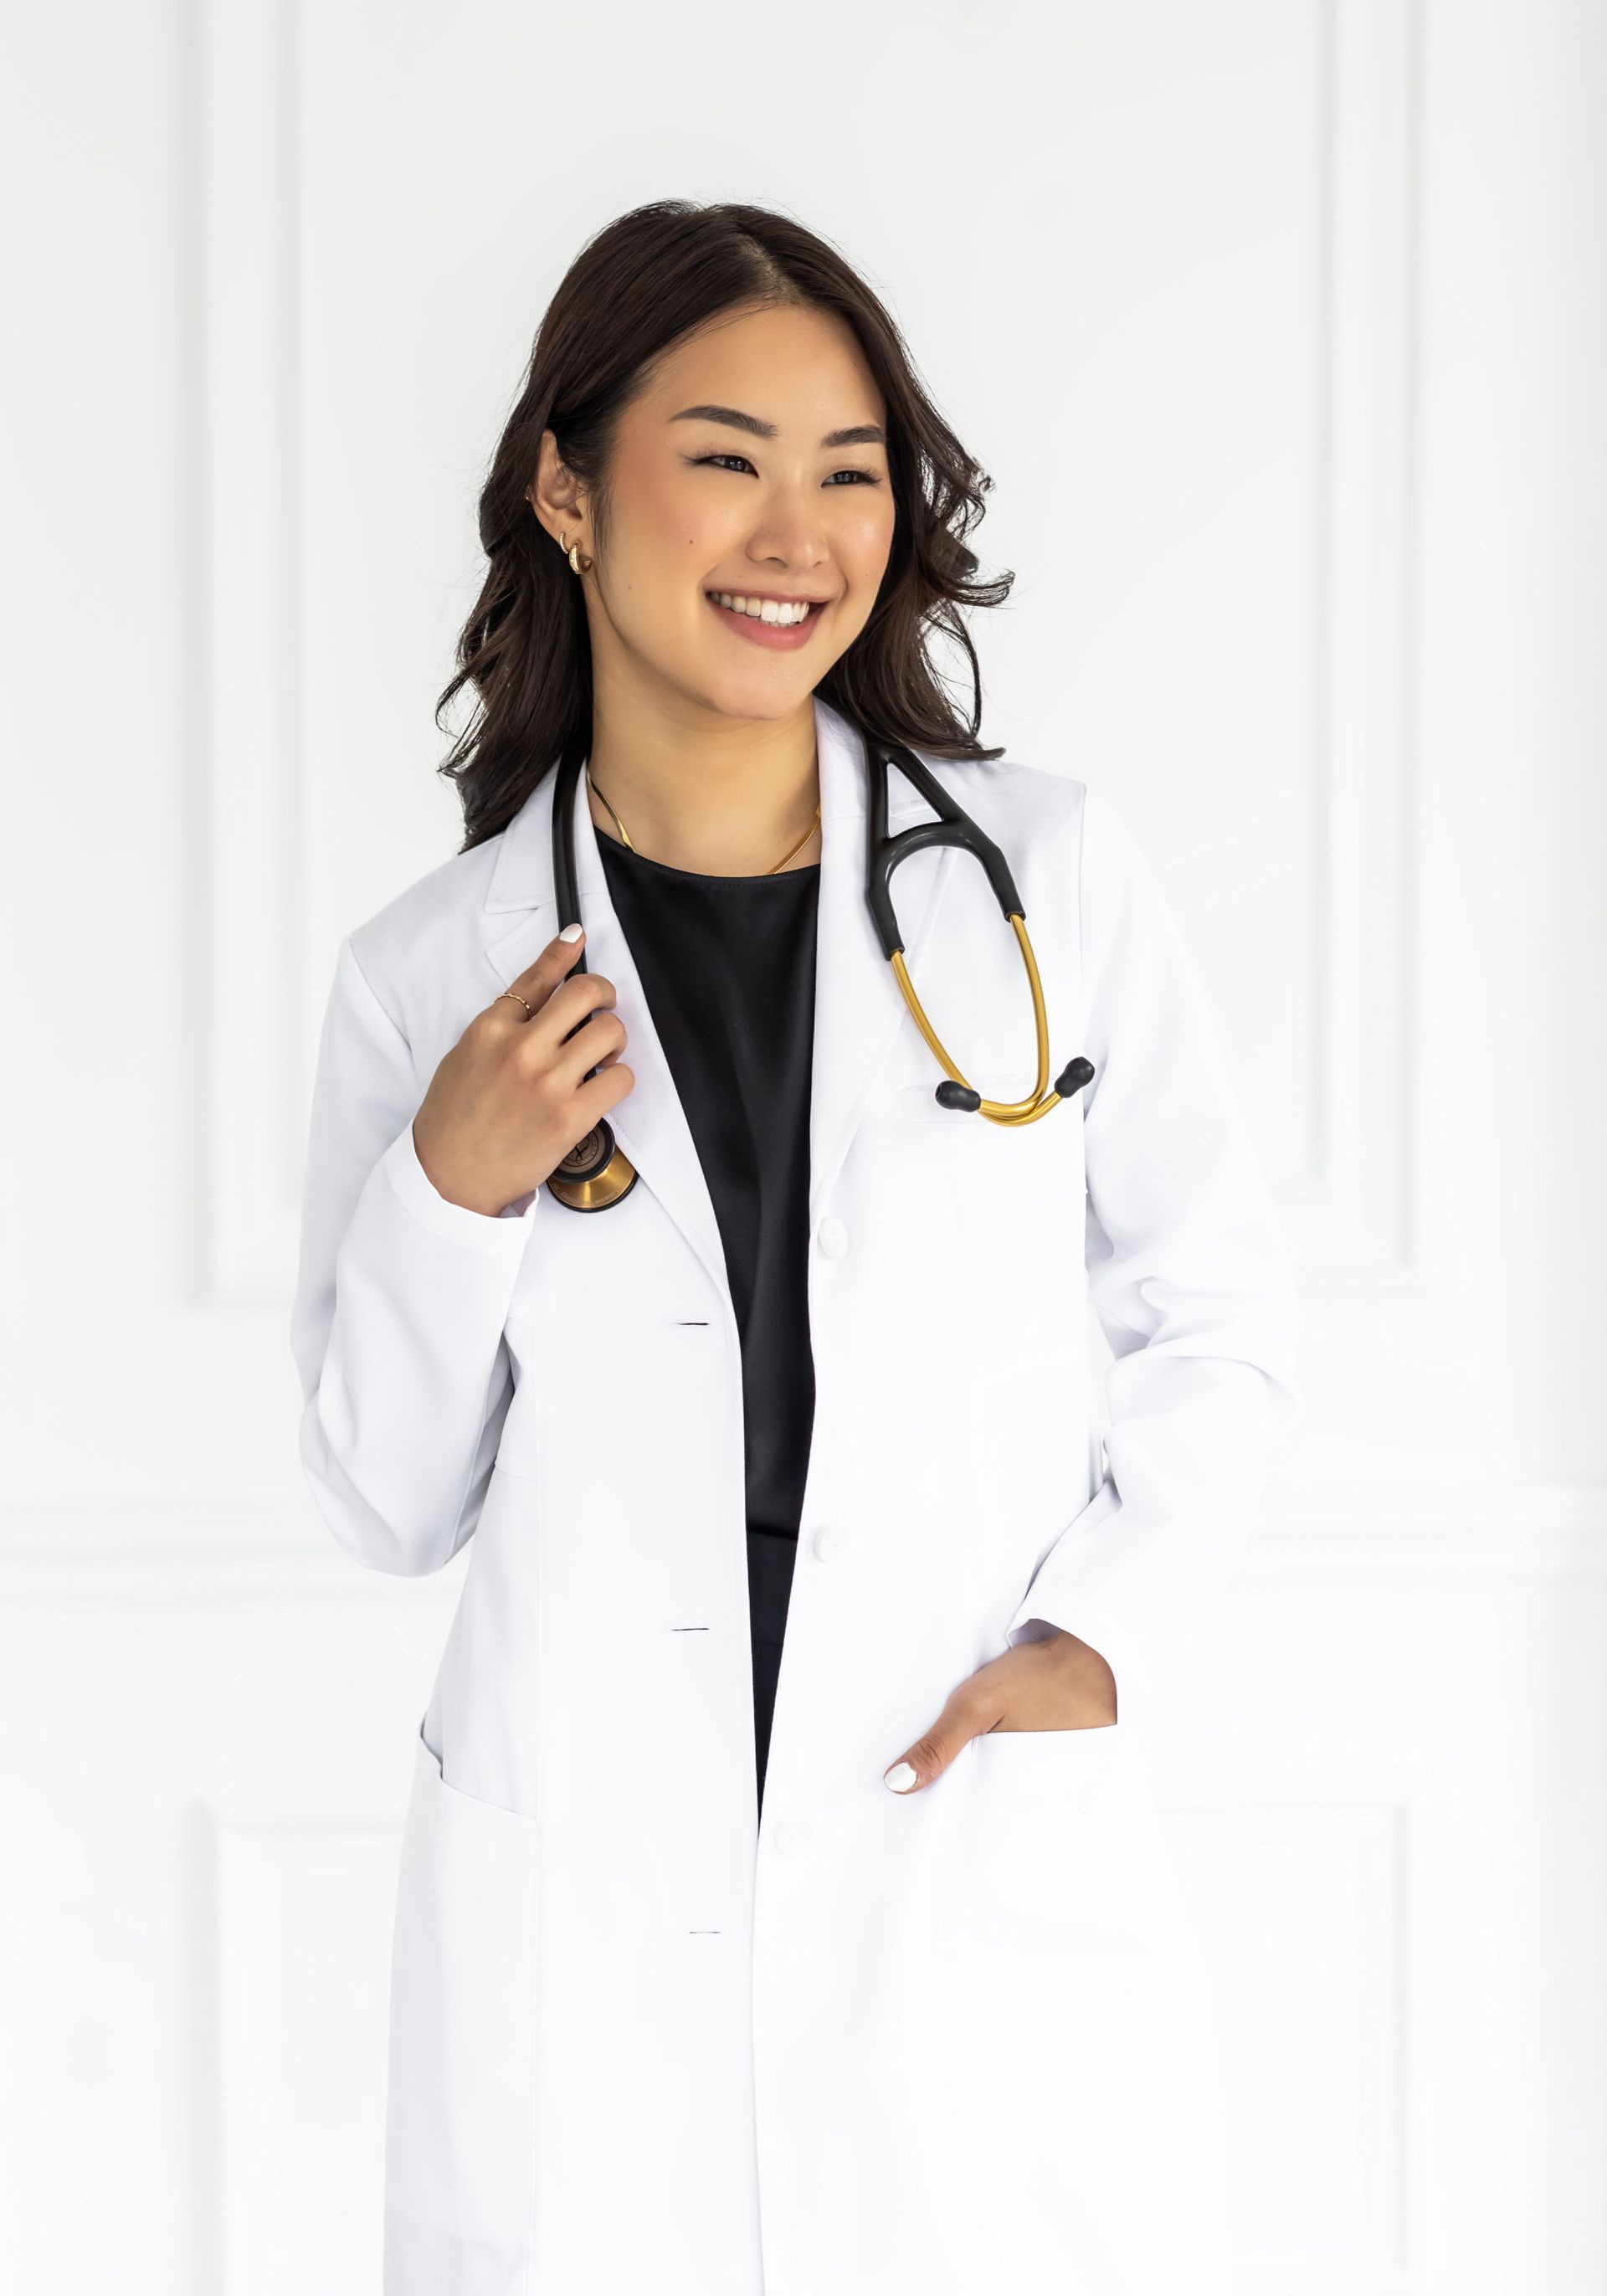 Smiling medical professional in a white jacket and black top, with a stethoscope around her neck, standing confidently in a bright white room.